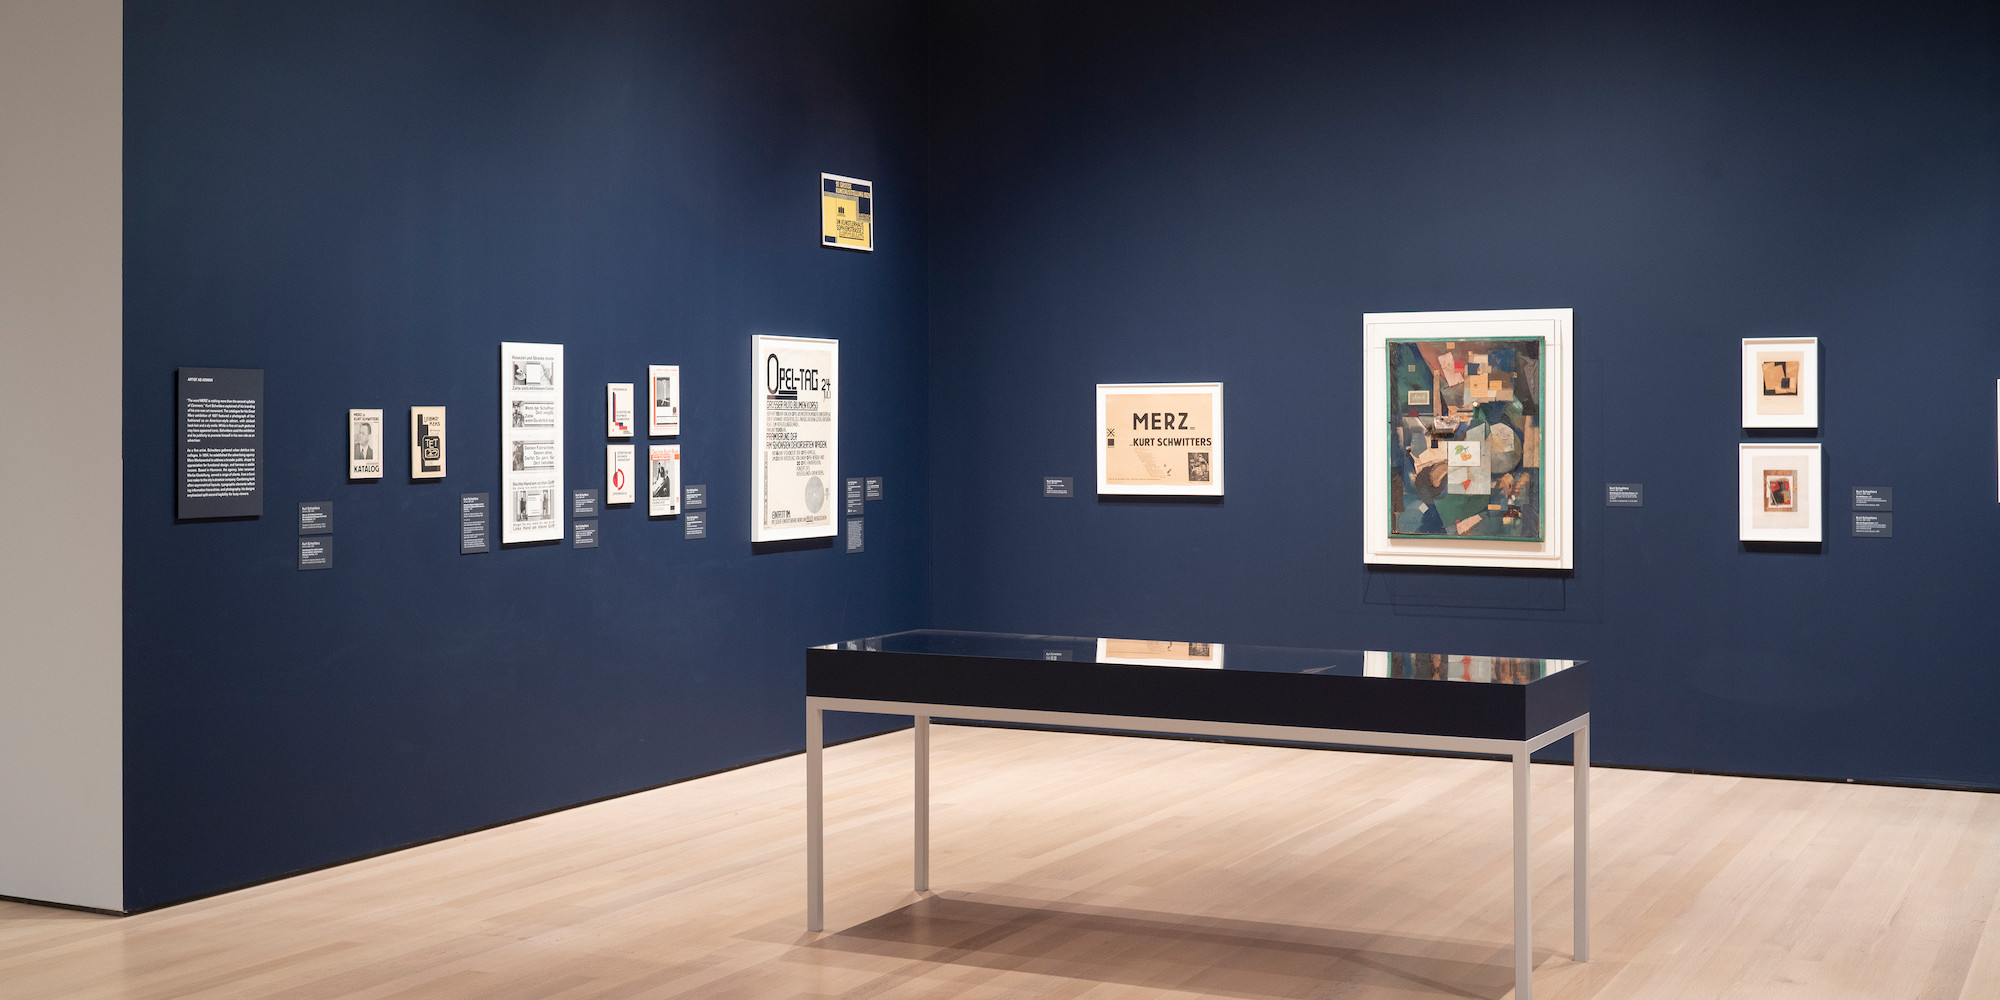 A selection of works by Kurt Schwitters in Engineer, Agitator, Constructor: The Artist Reinvented, The Museum of Modern Art, New York, December 13, 2020–April 10, 2021